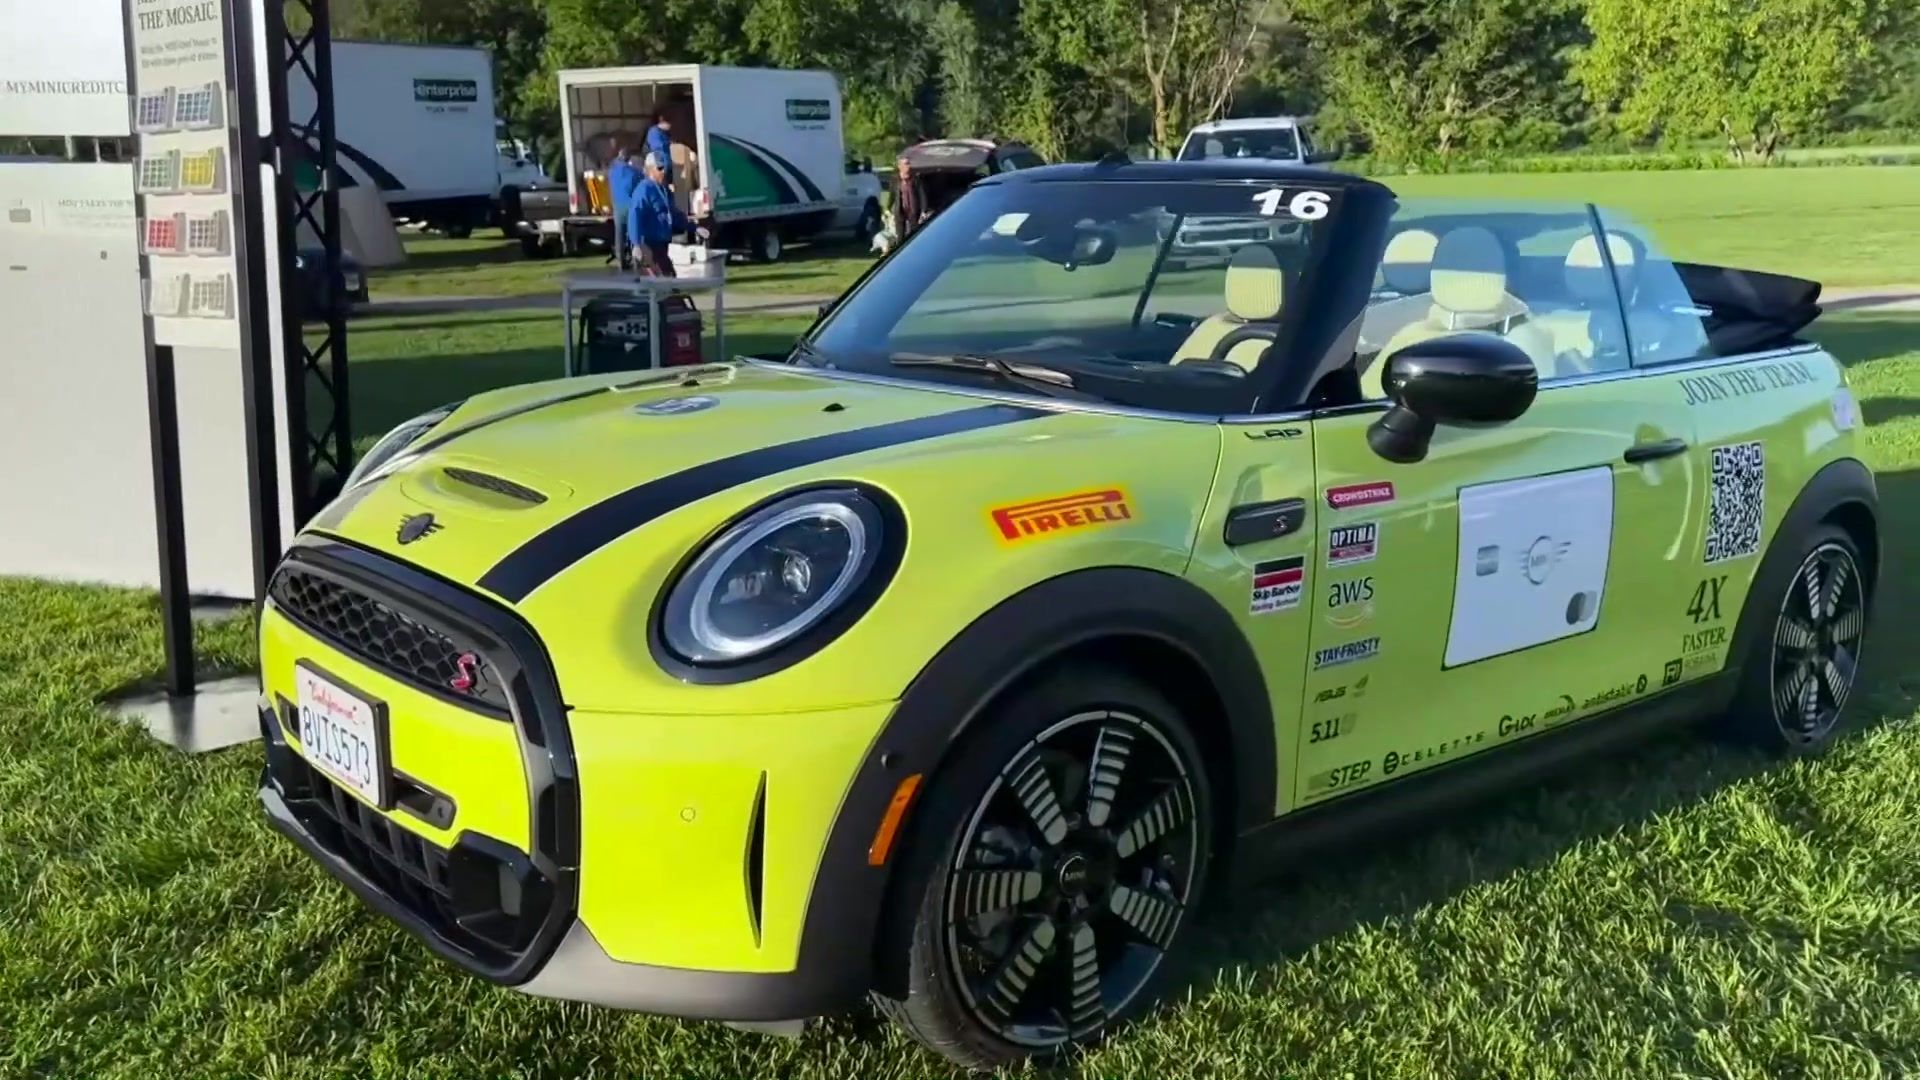 MINI TAKES THE STATES 2022 hits the road for another epic adventure